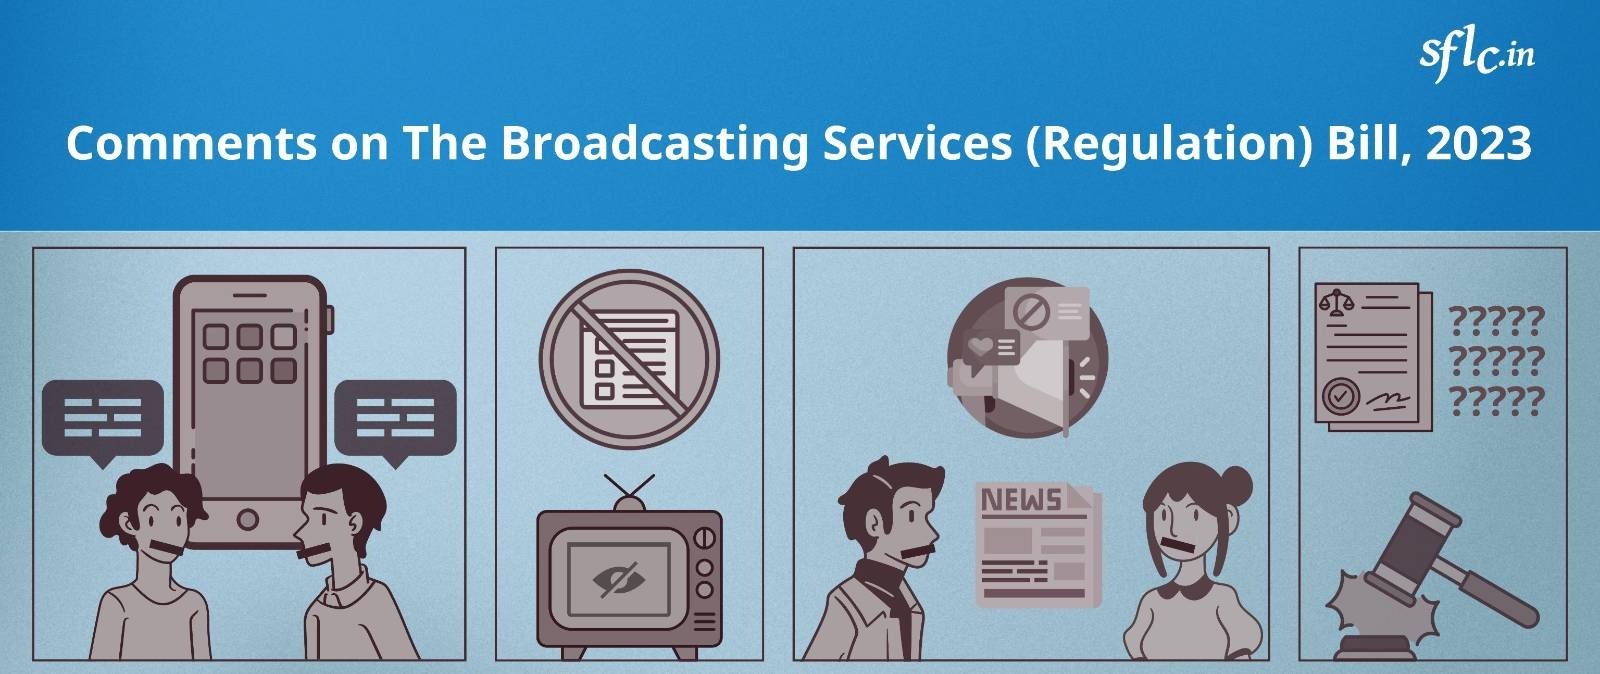 SFLC.in’s Comments on The Broadcasting Services (Regulation) Bill, 2023